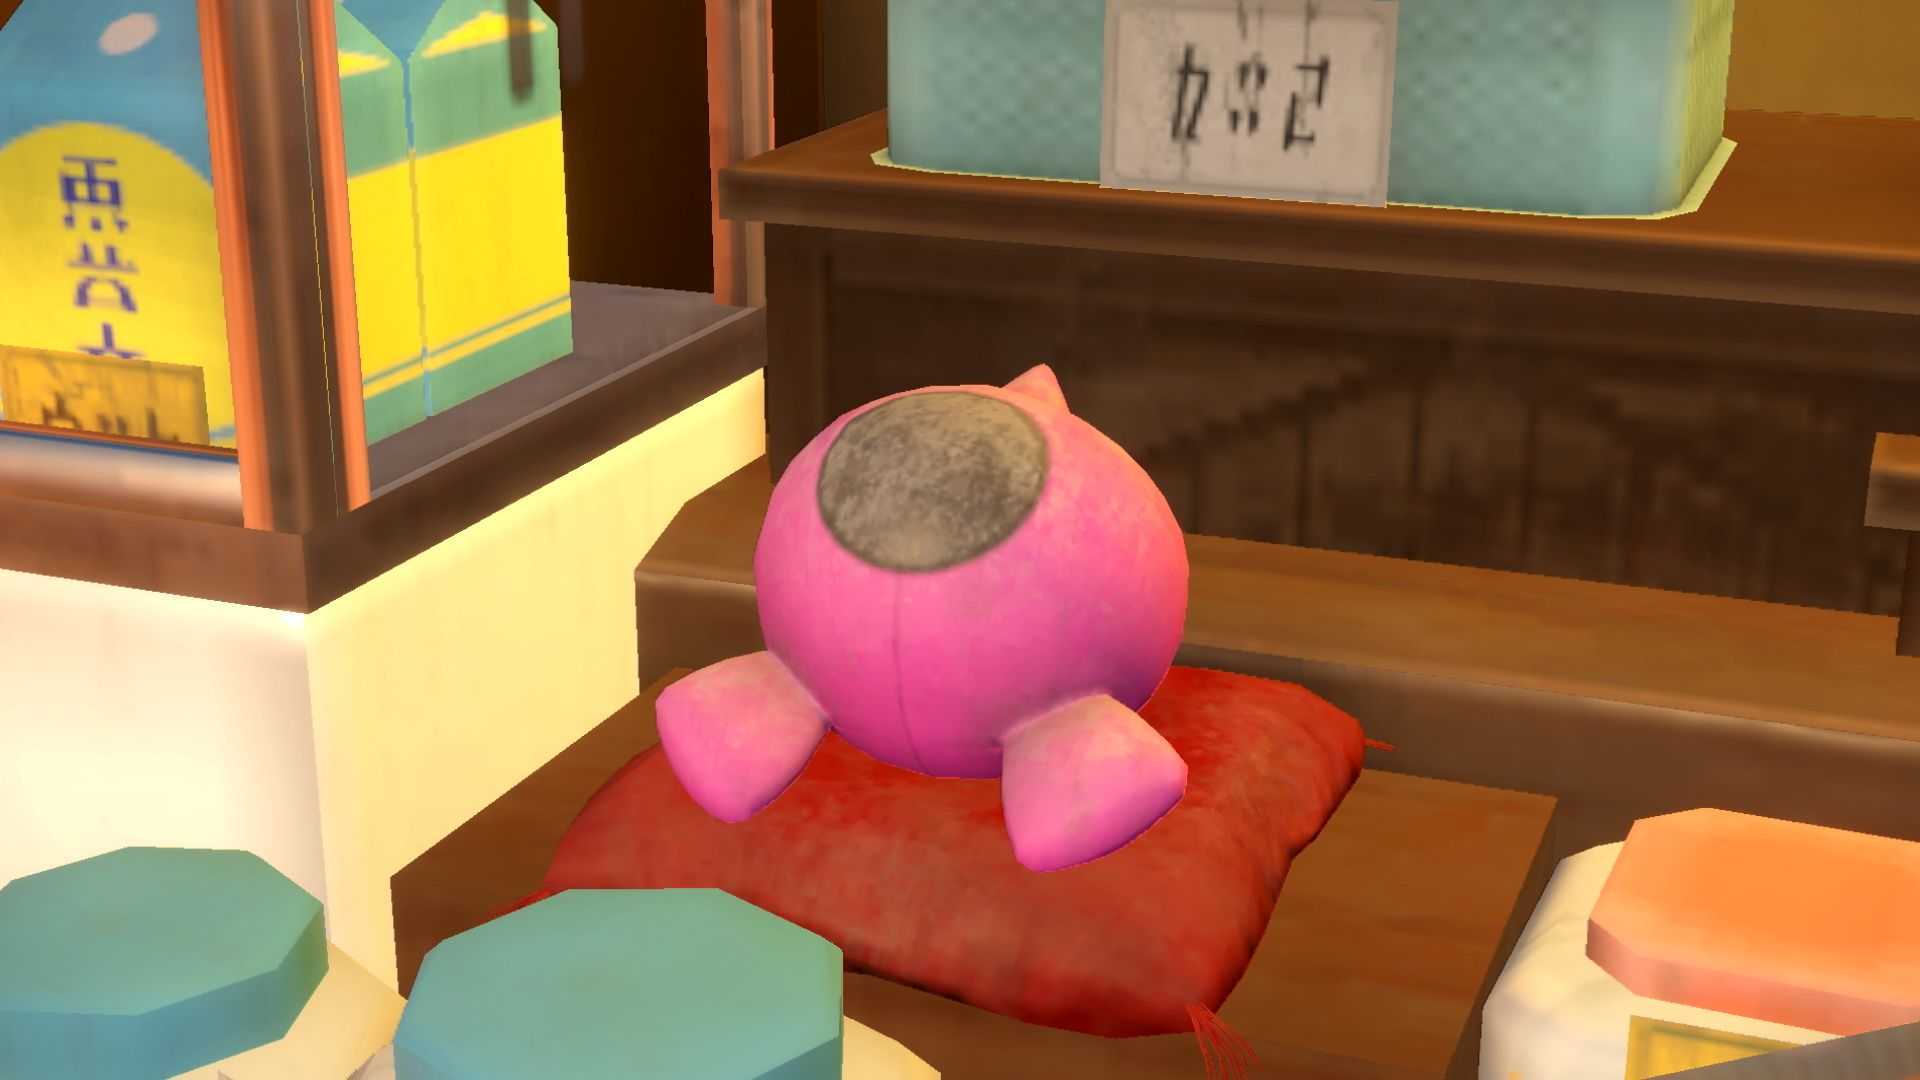 The mysterious berry is shown on a shelf